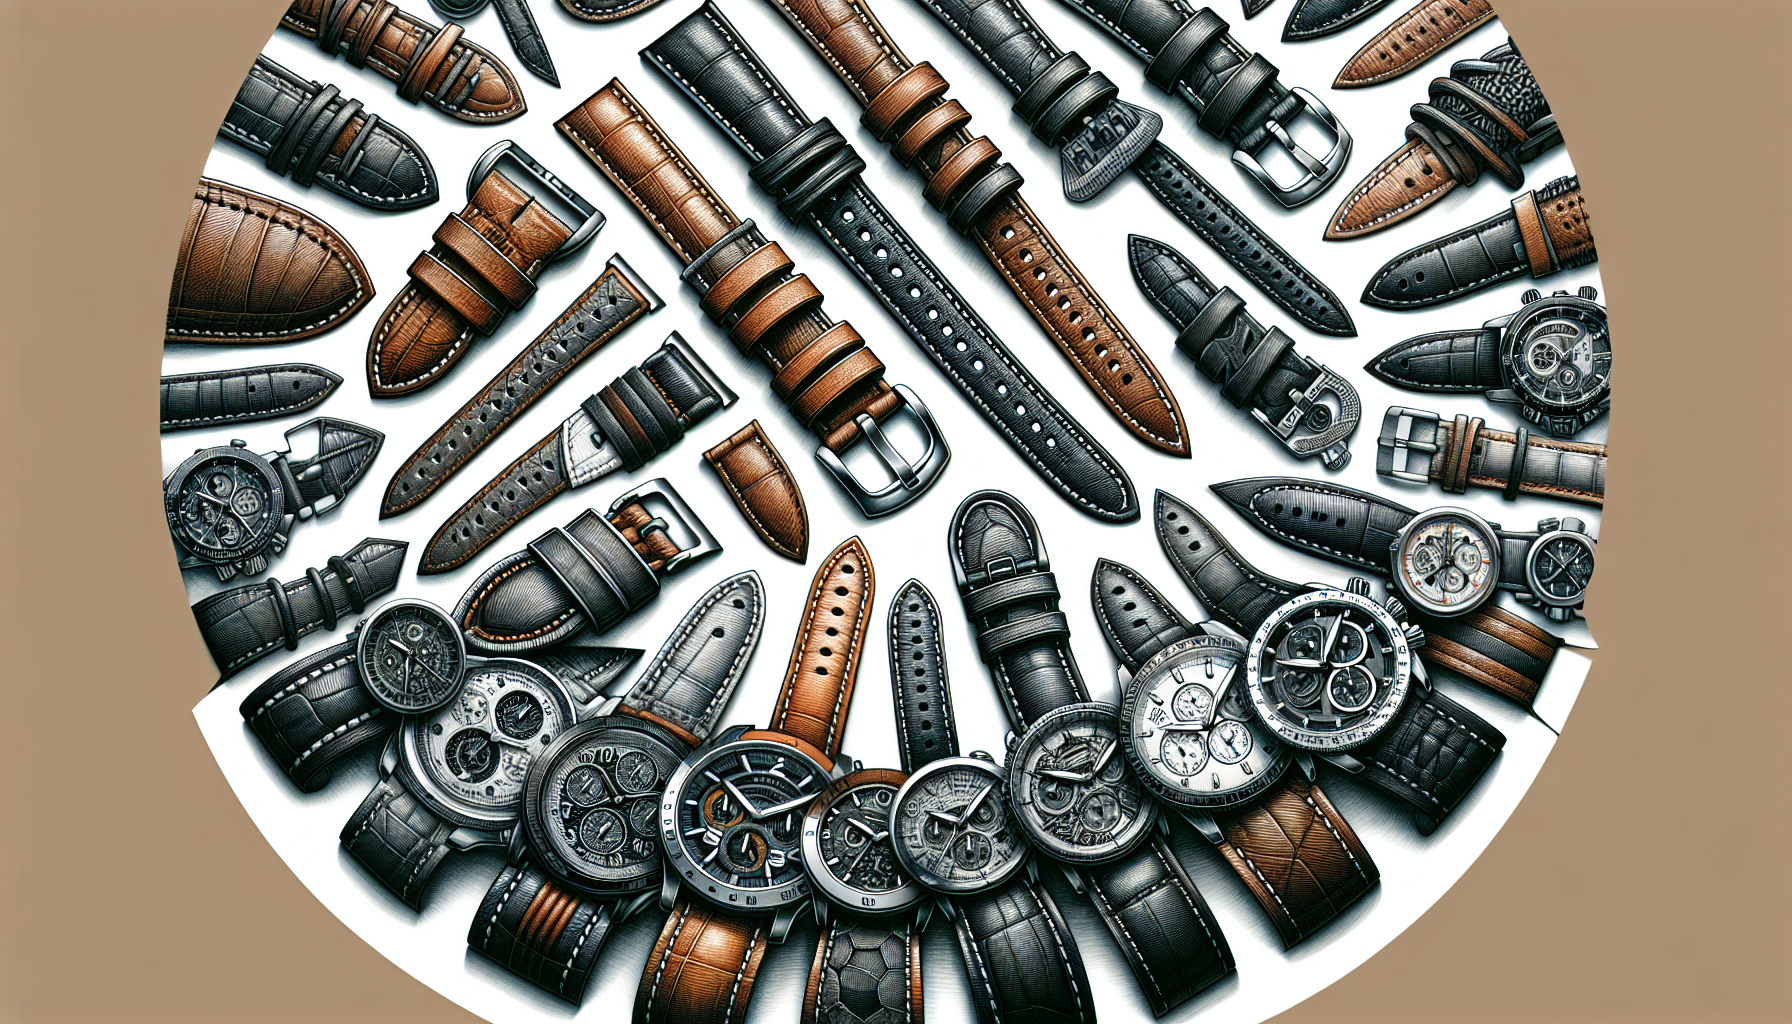 Customized leather straps for different watch brands